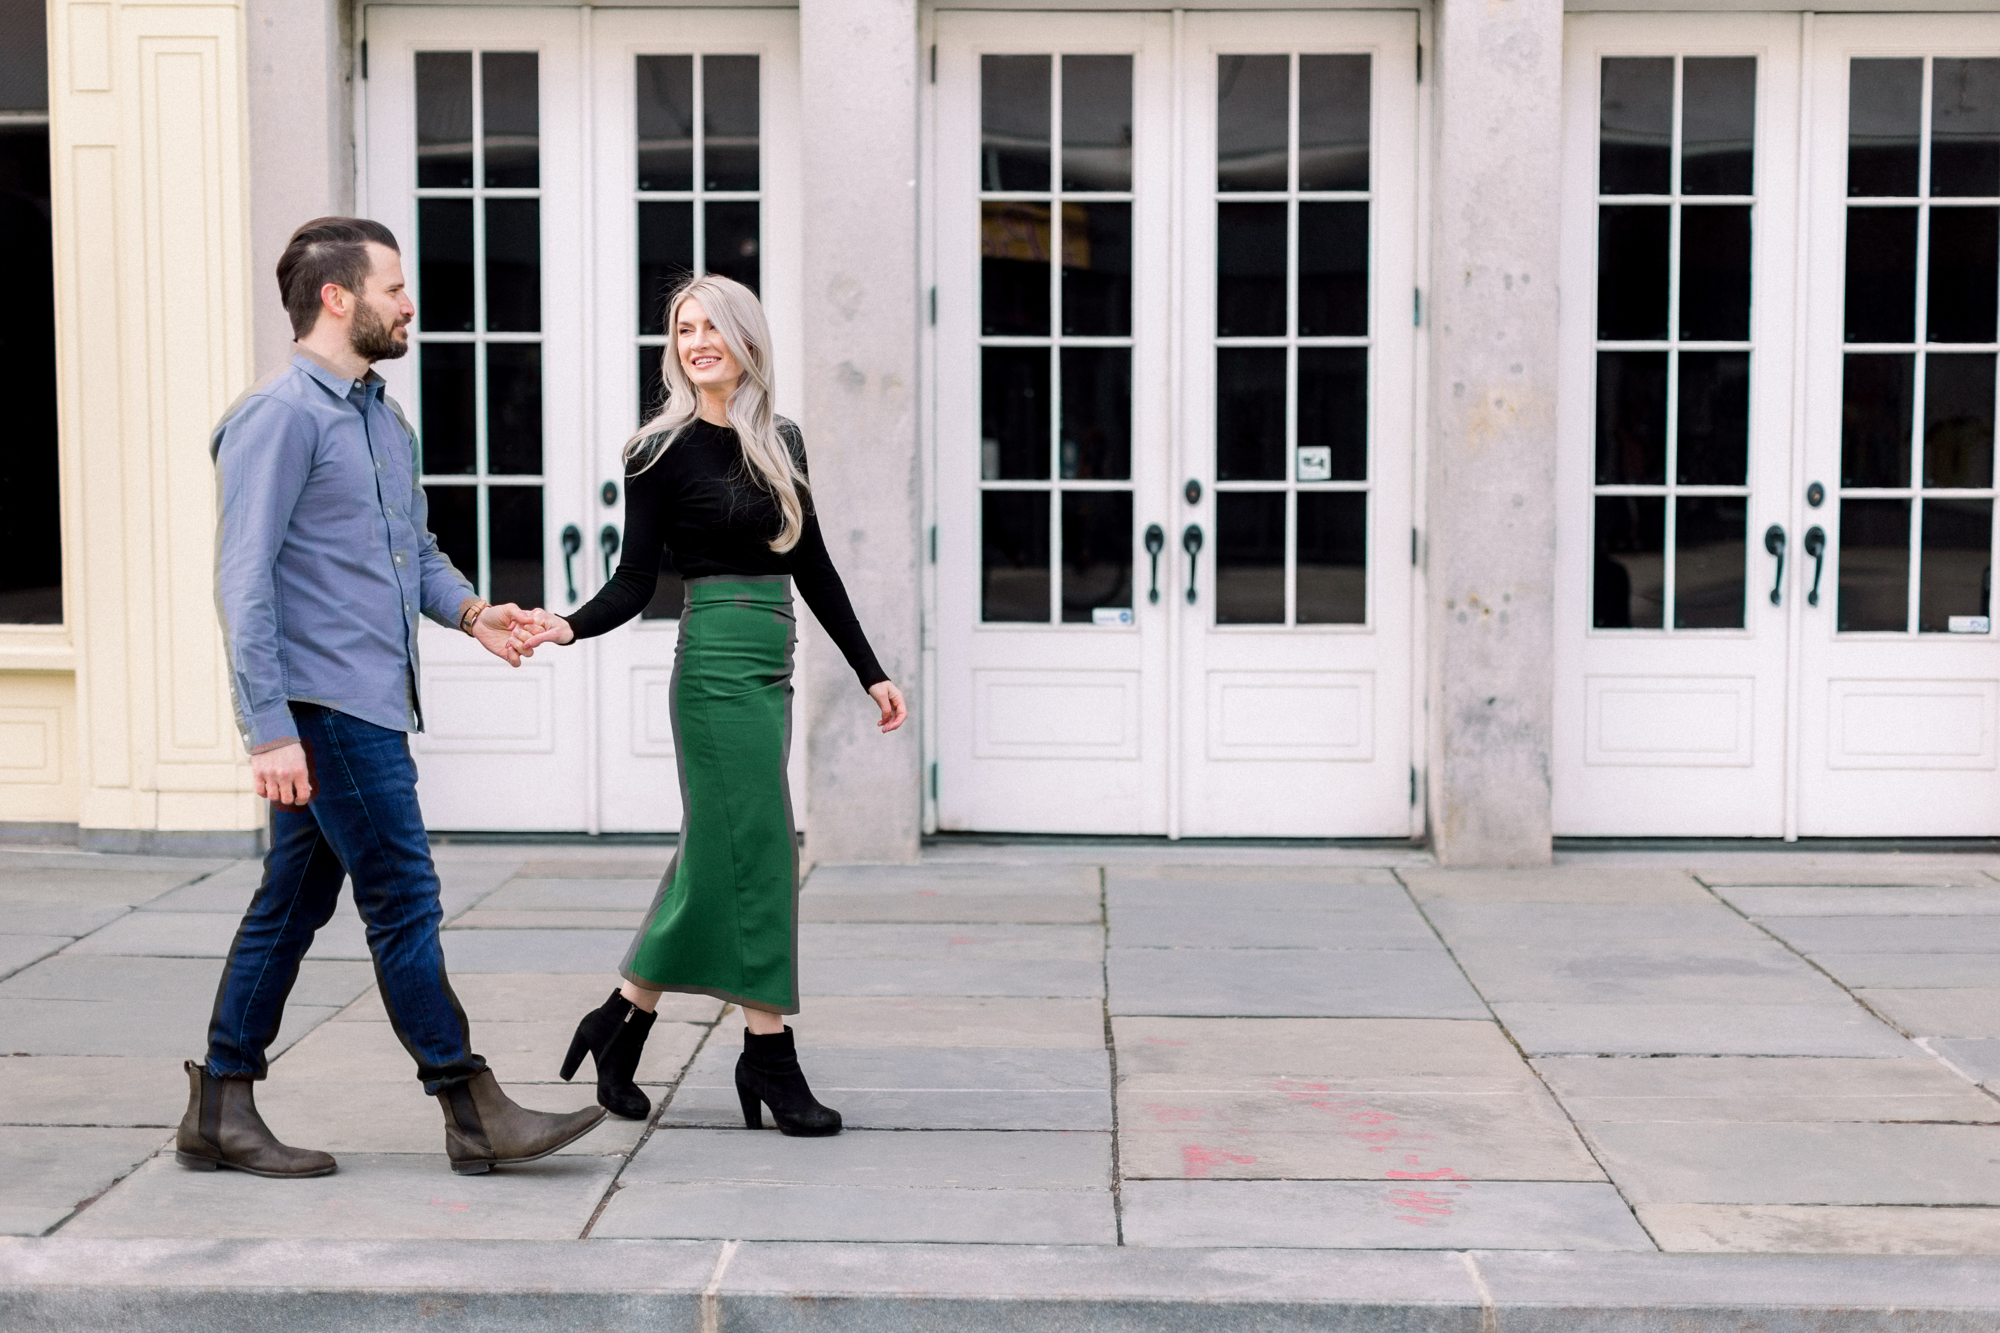 Lovely South Street Seaport Engagement Photos